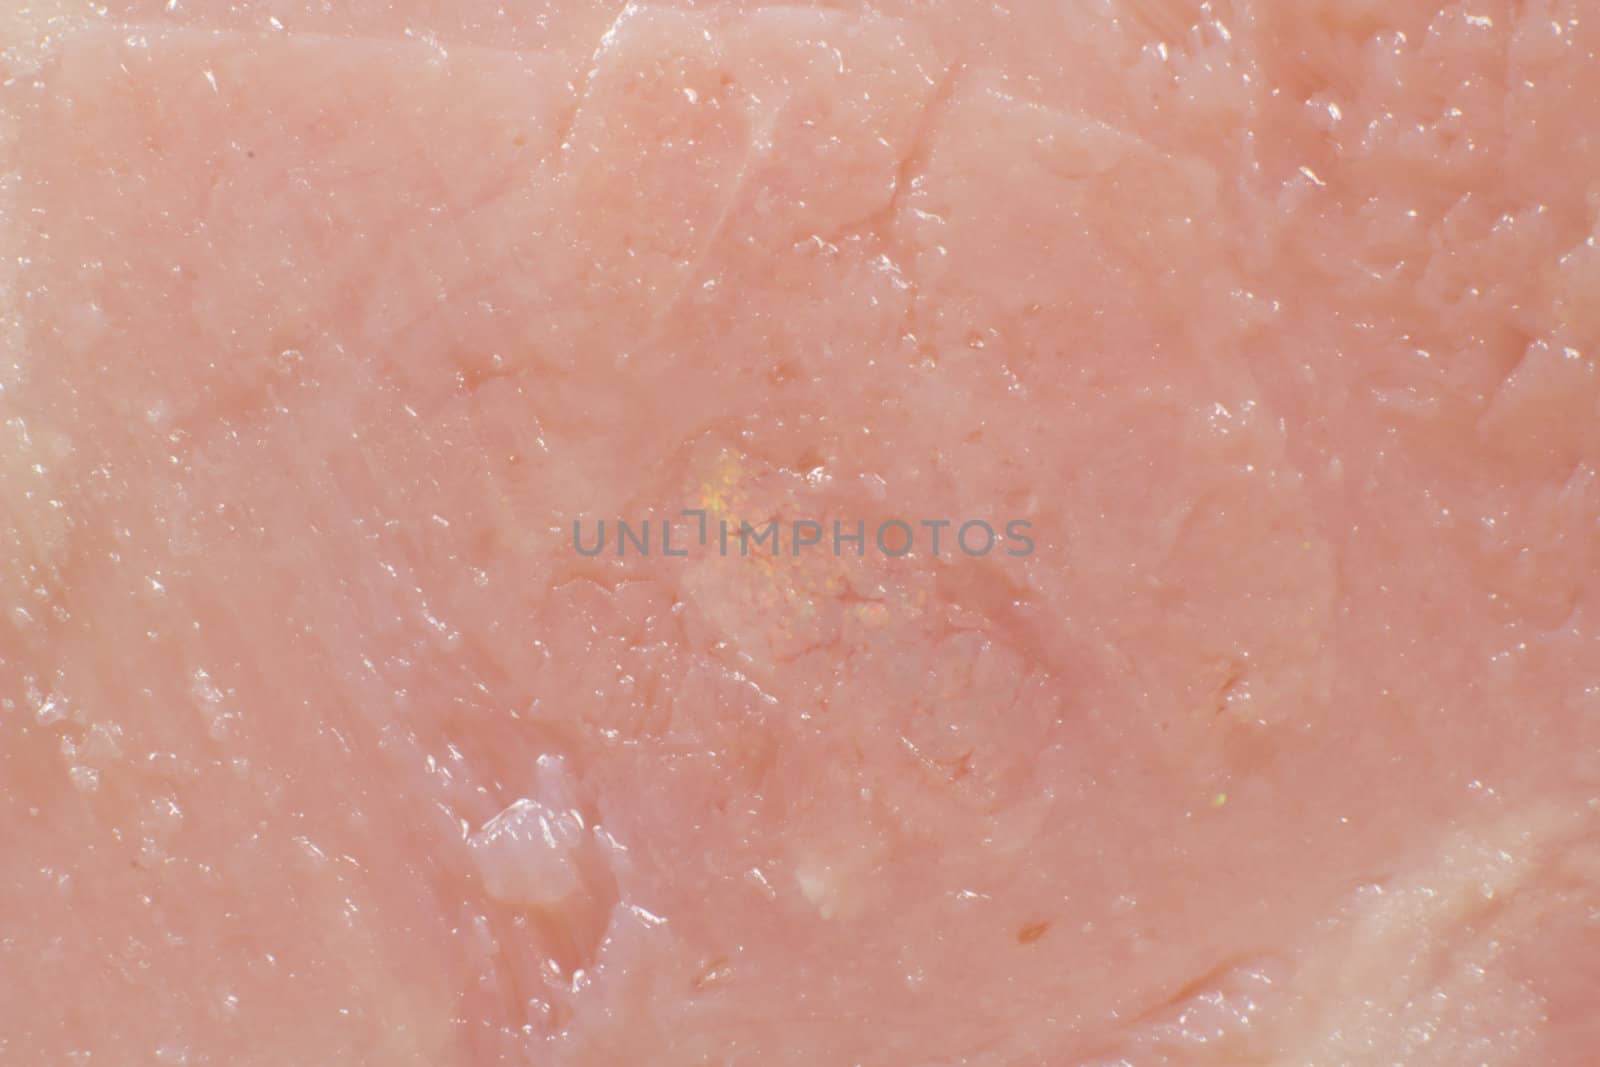 A macro picture of a slice of ham